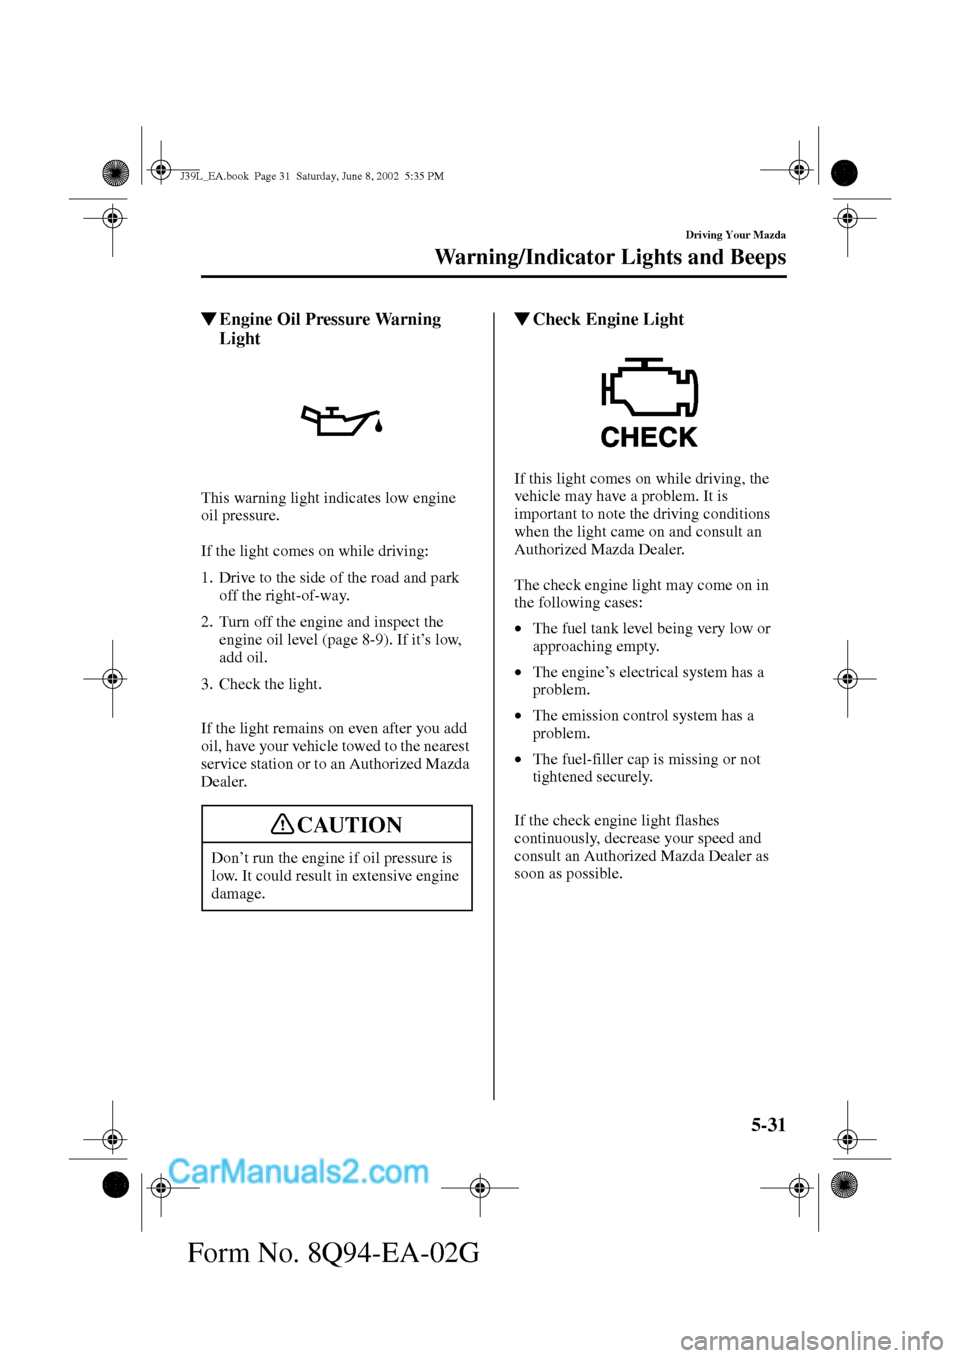 MAZDA MODEL PROTÉGÉ 2003  Owners Manual (in English) 5-31
Driving Your Mazda
Warning/Indicator Lights and Beeps
Form No. 8Q94-EA-02G
Engine Oil Pressure Warning 
Light
This warning light indicates low engine 
oil pressure.
If the light comes on while d